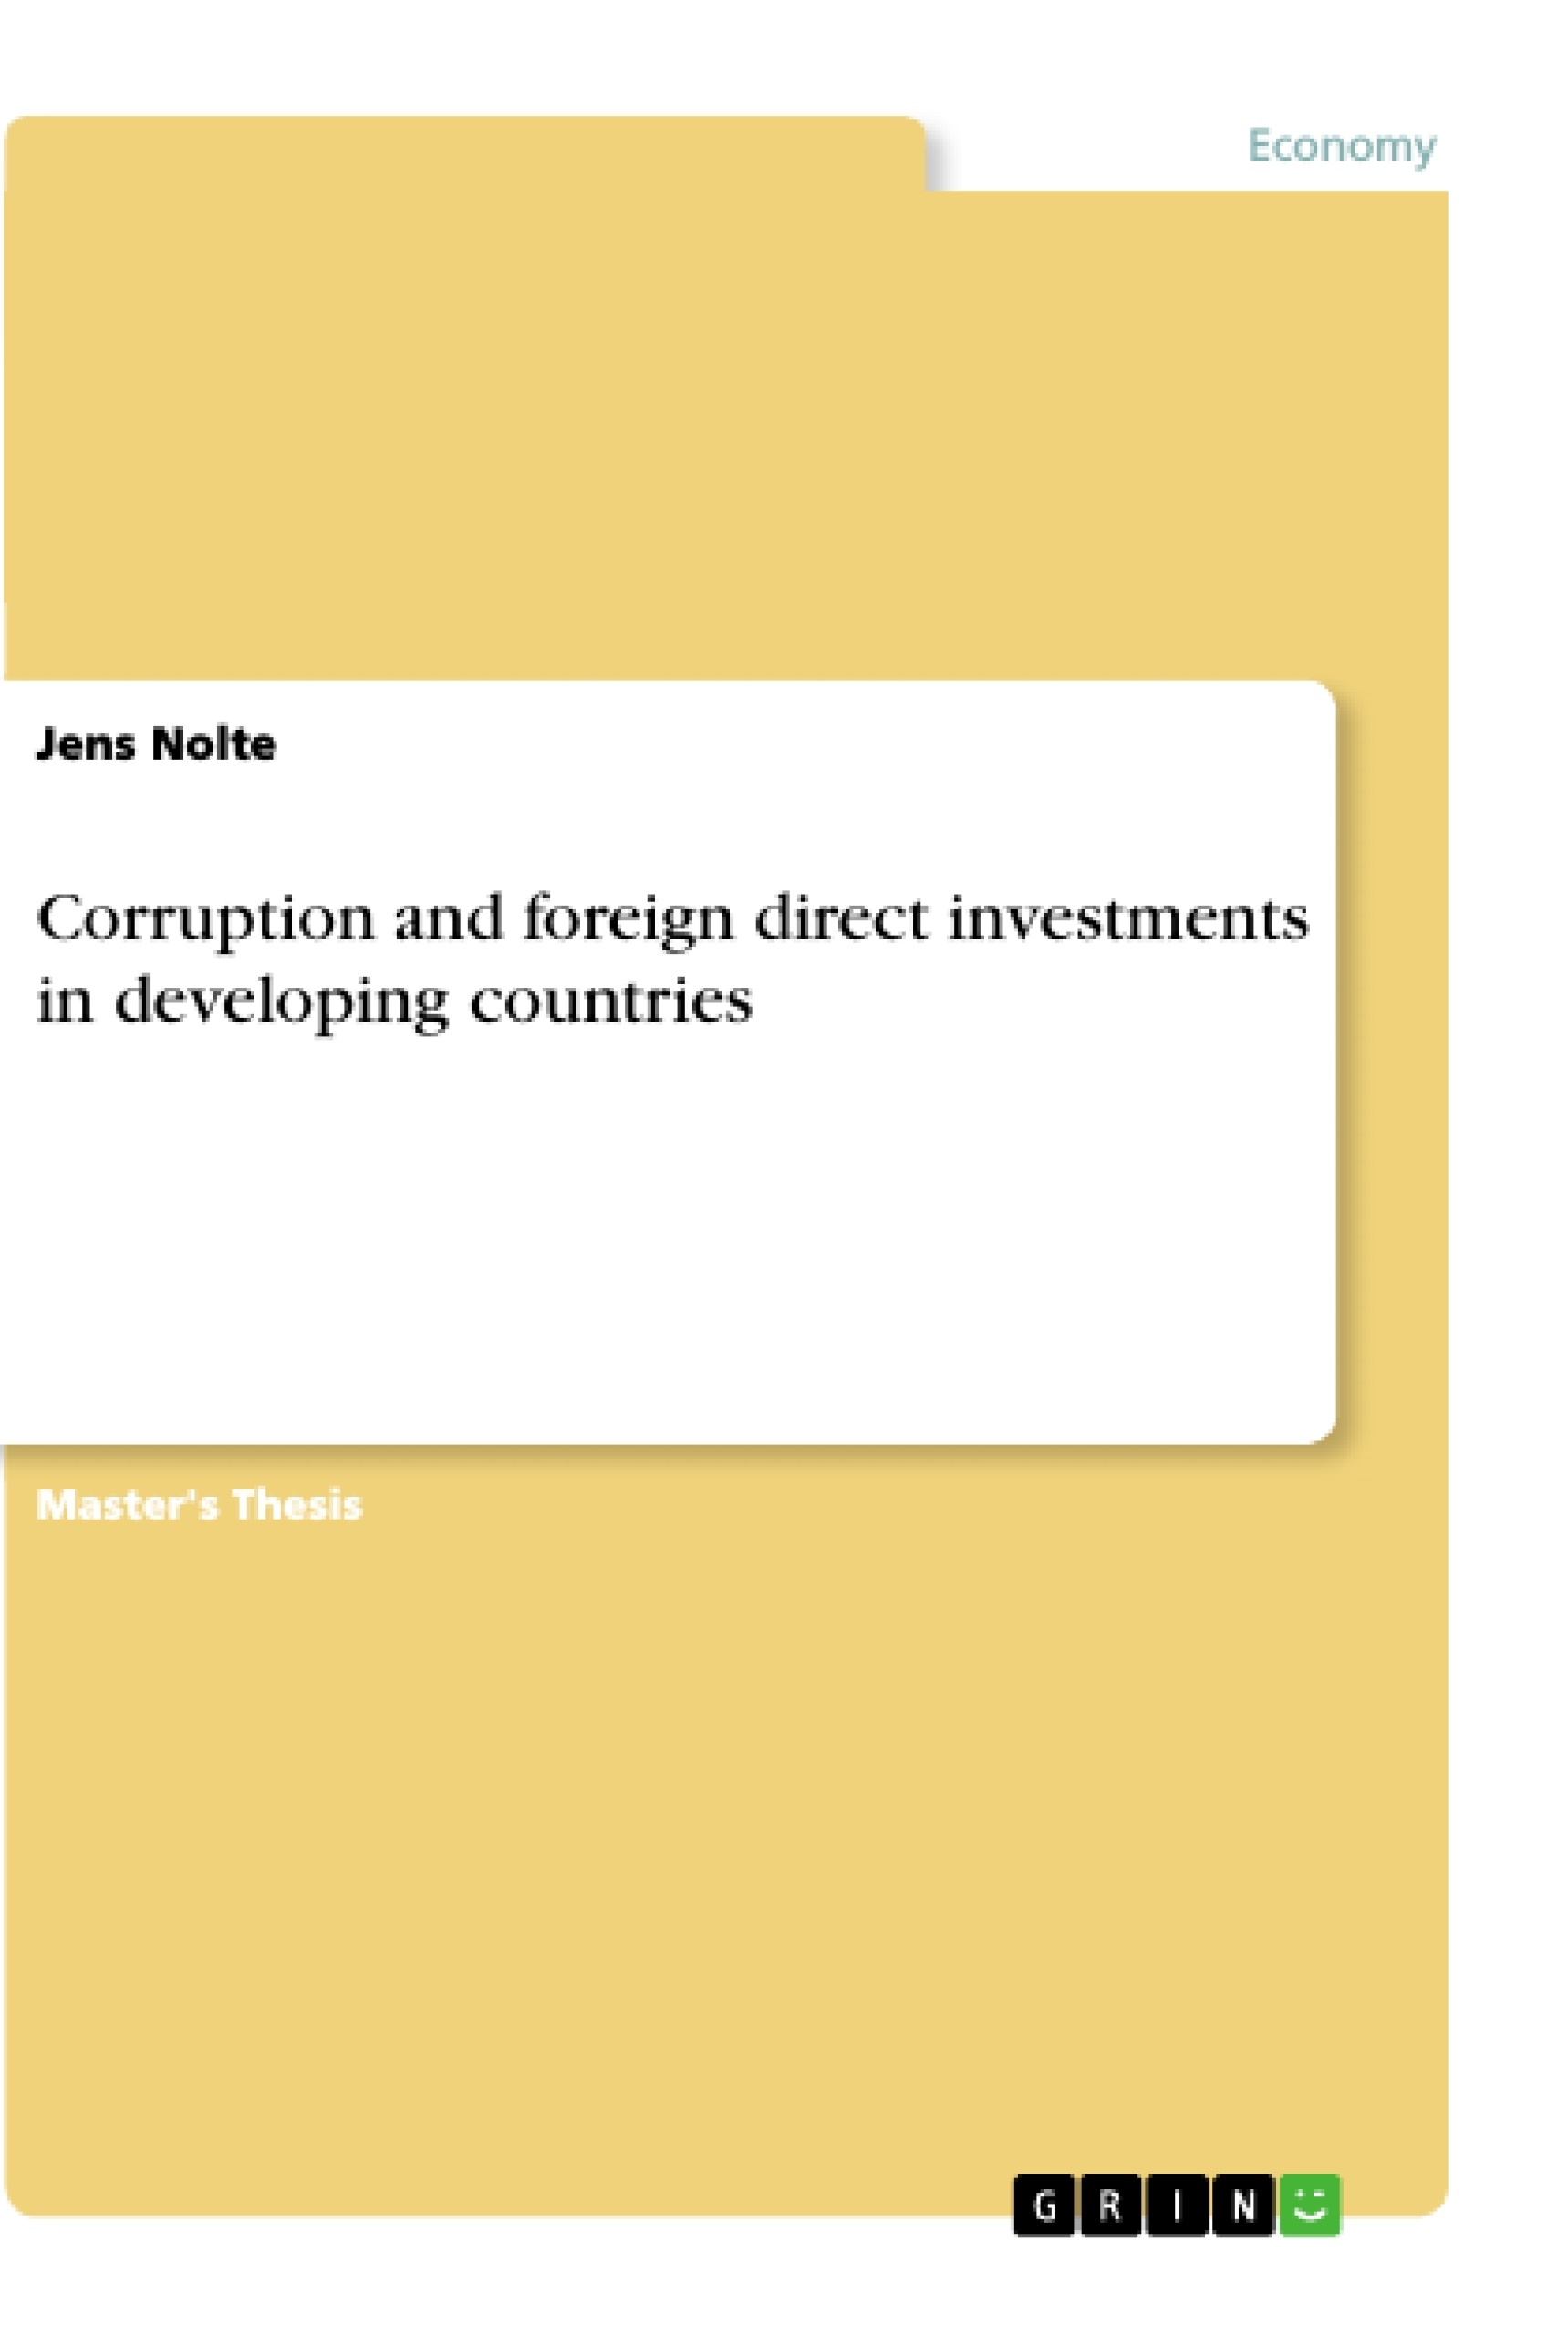 Title: Corruption and foreign direct investments in developing countries